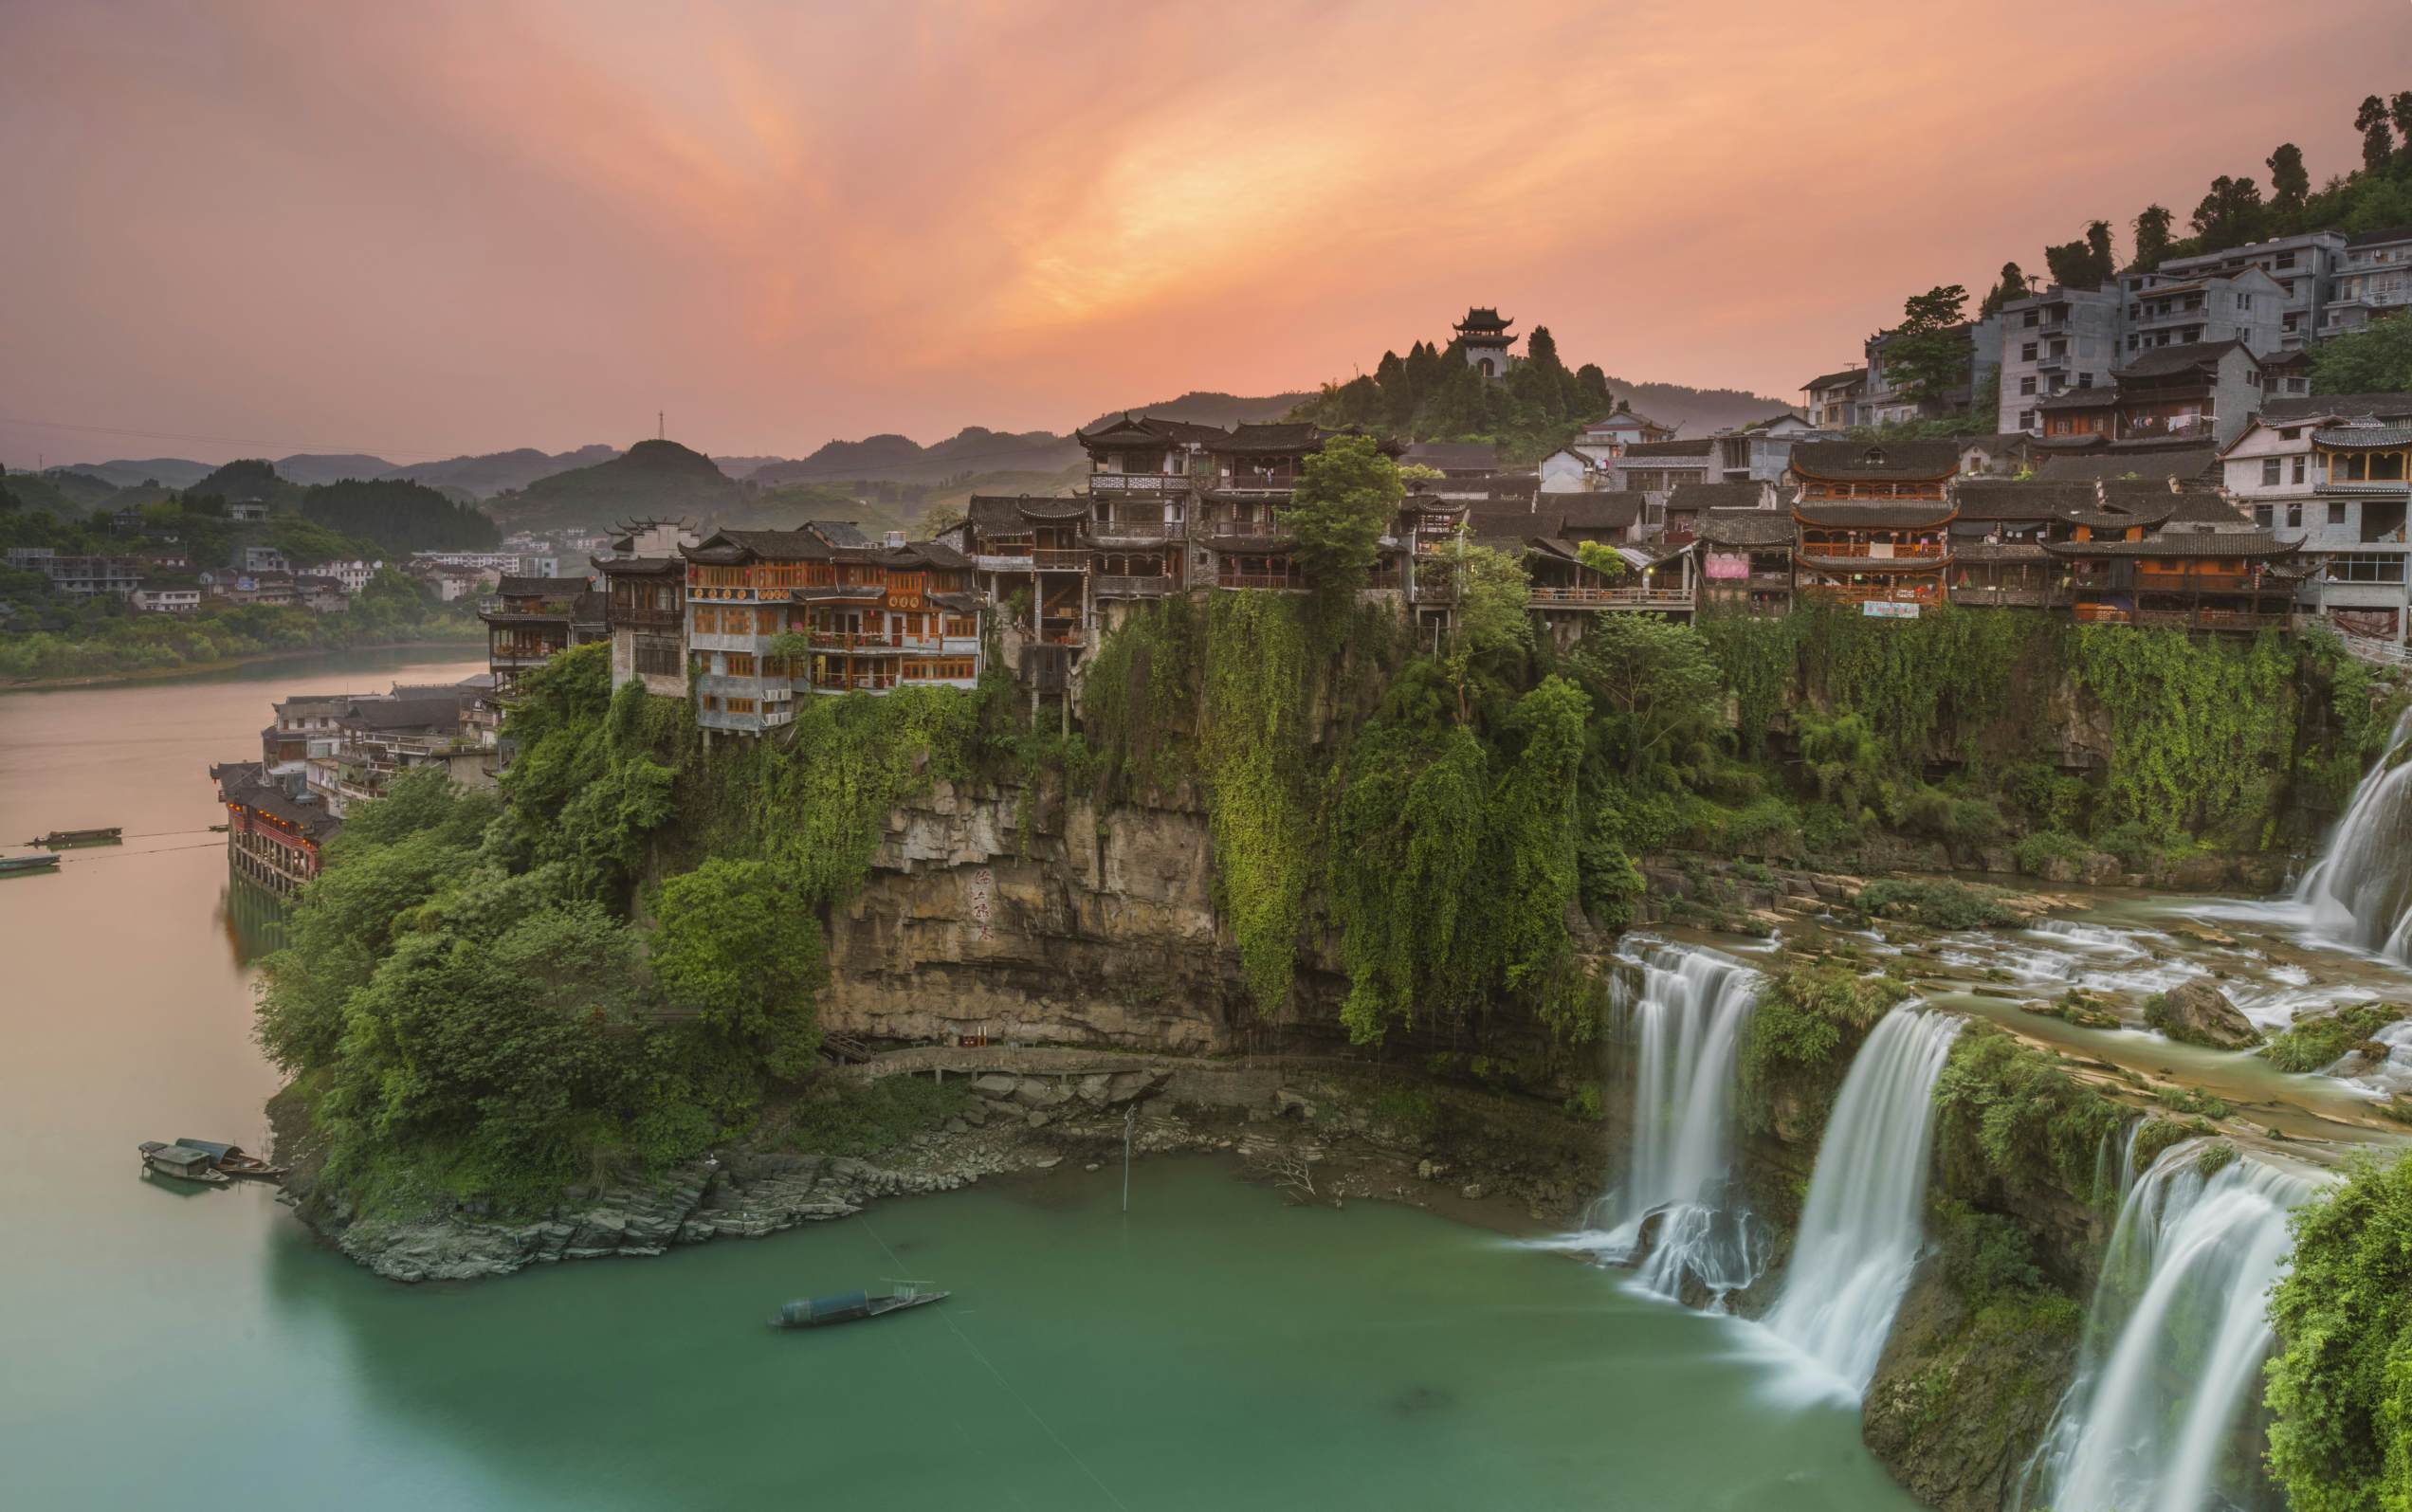 Hunan travel | China, Asia - Lonely Planet